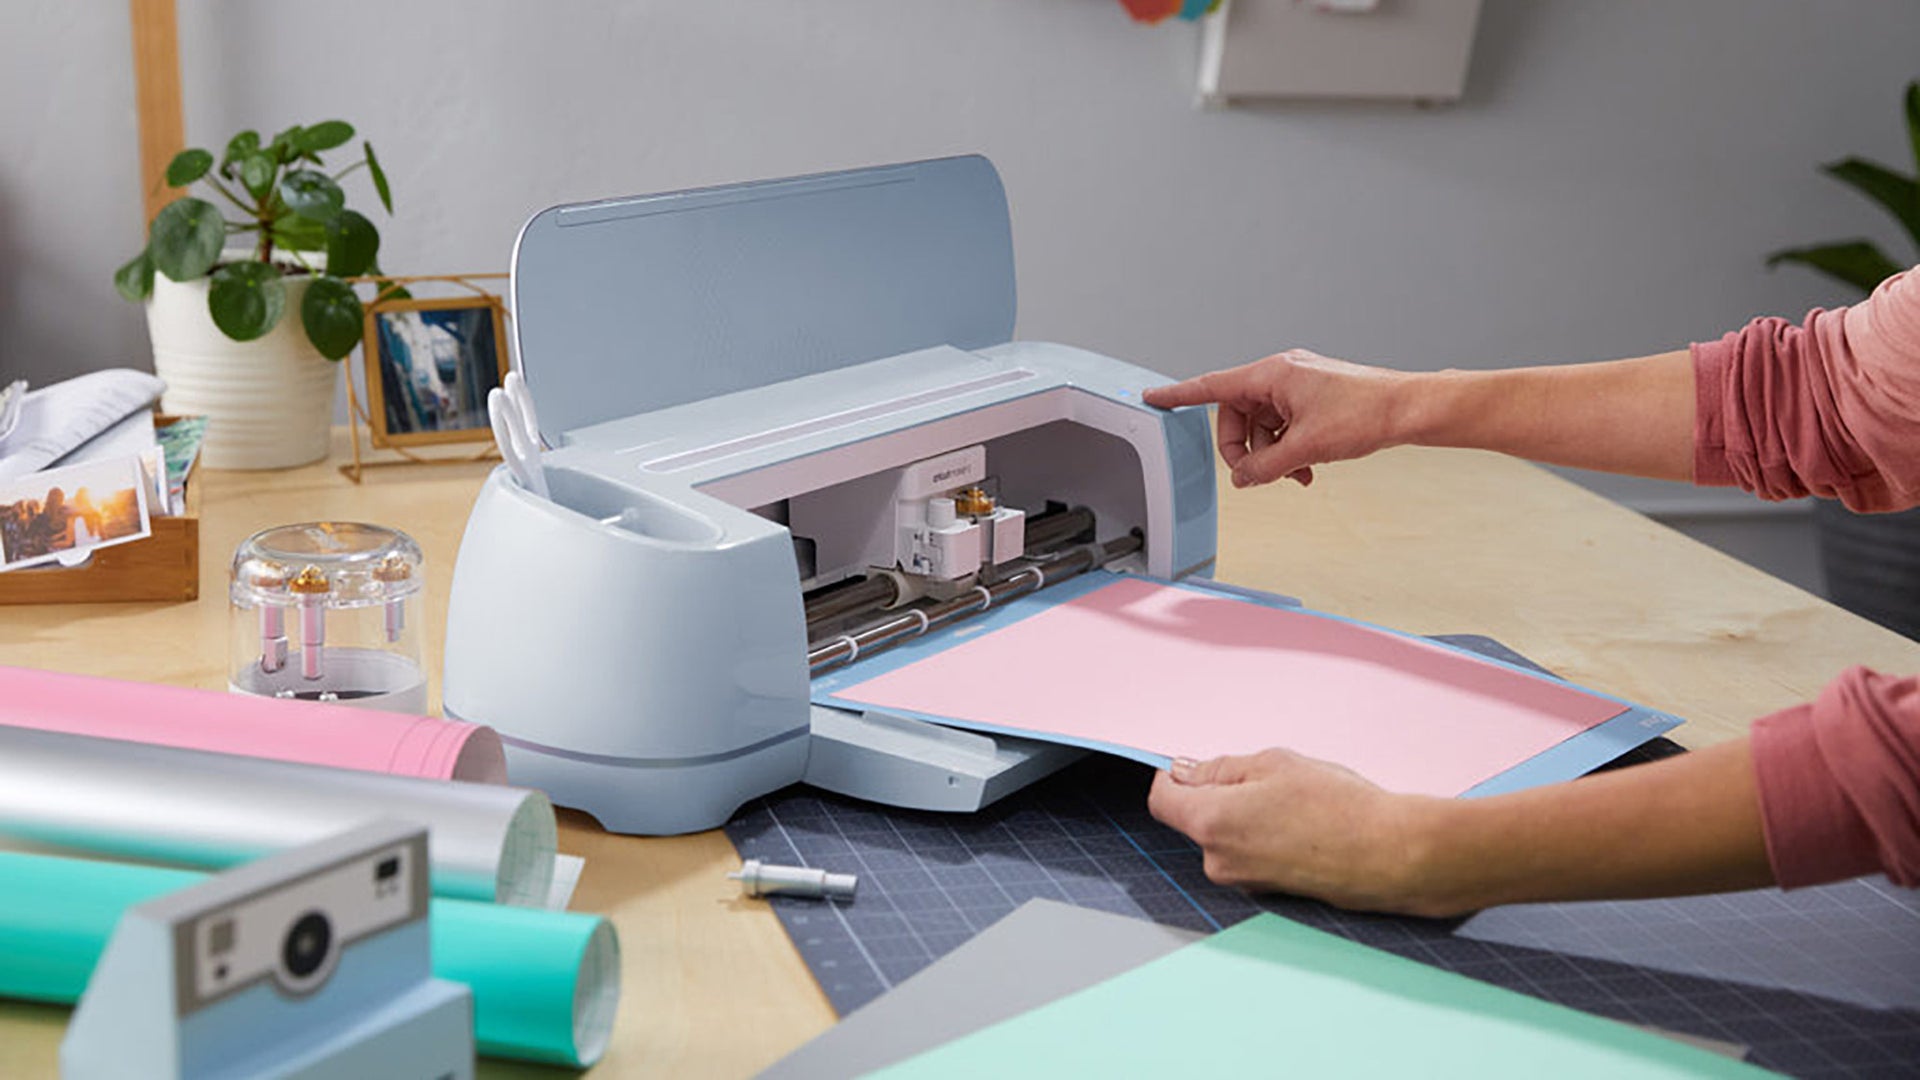 Mother's Day Cricut Gift Guide